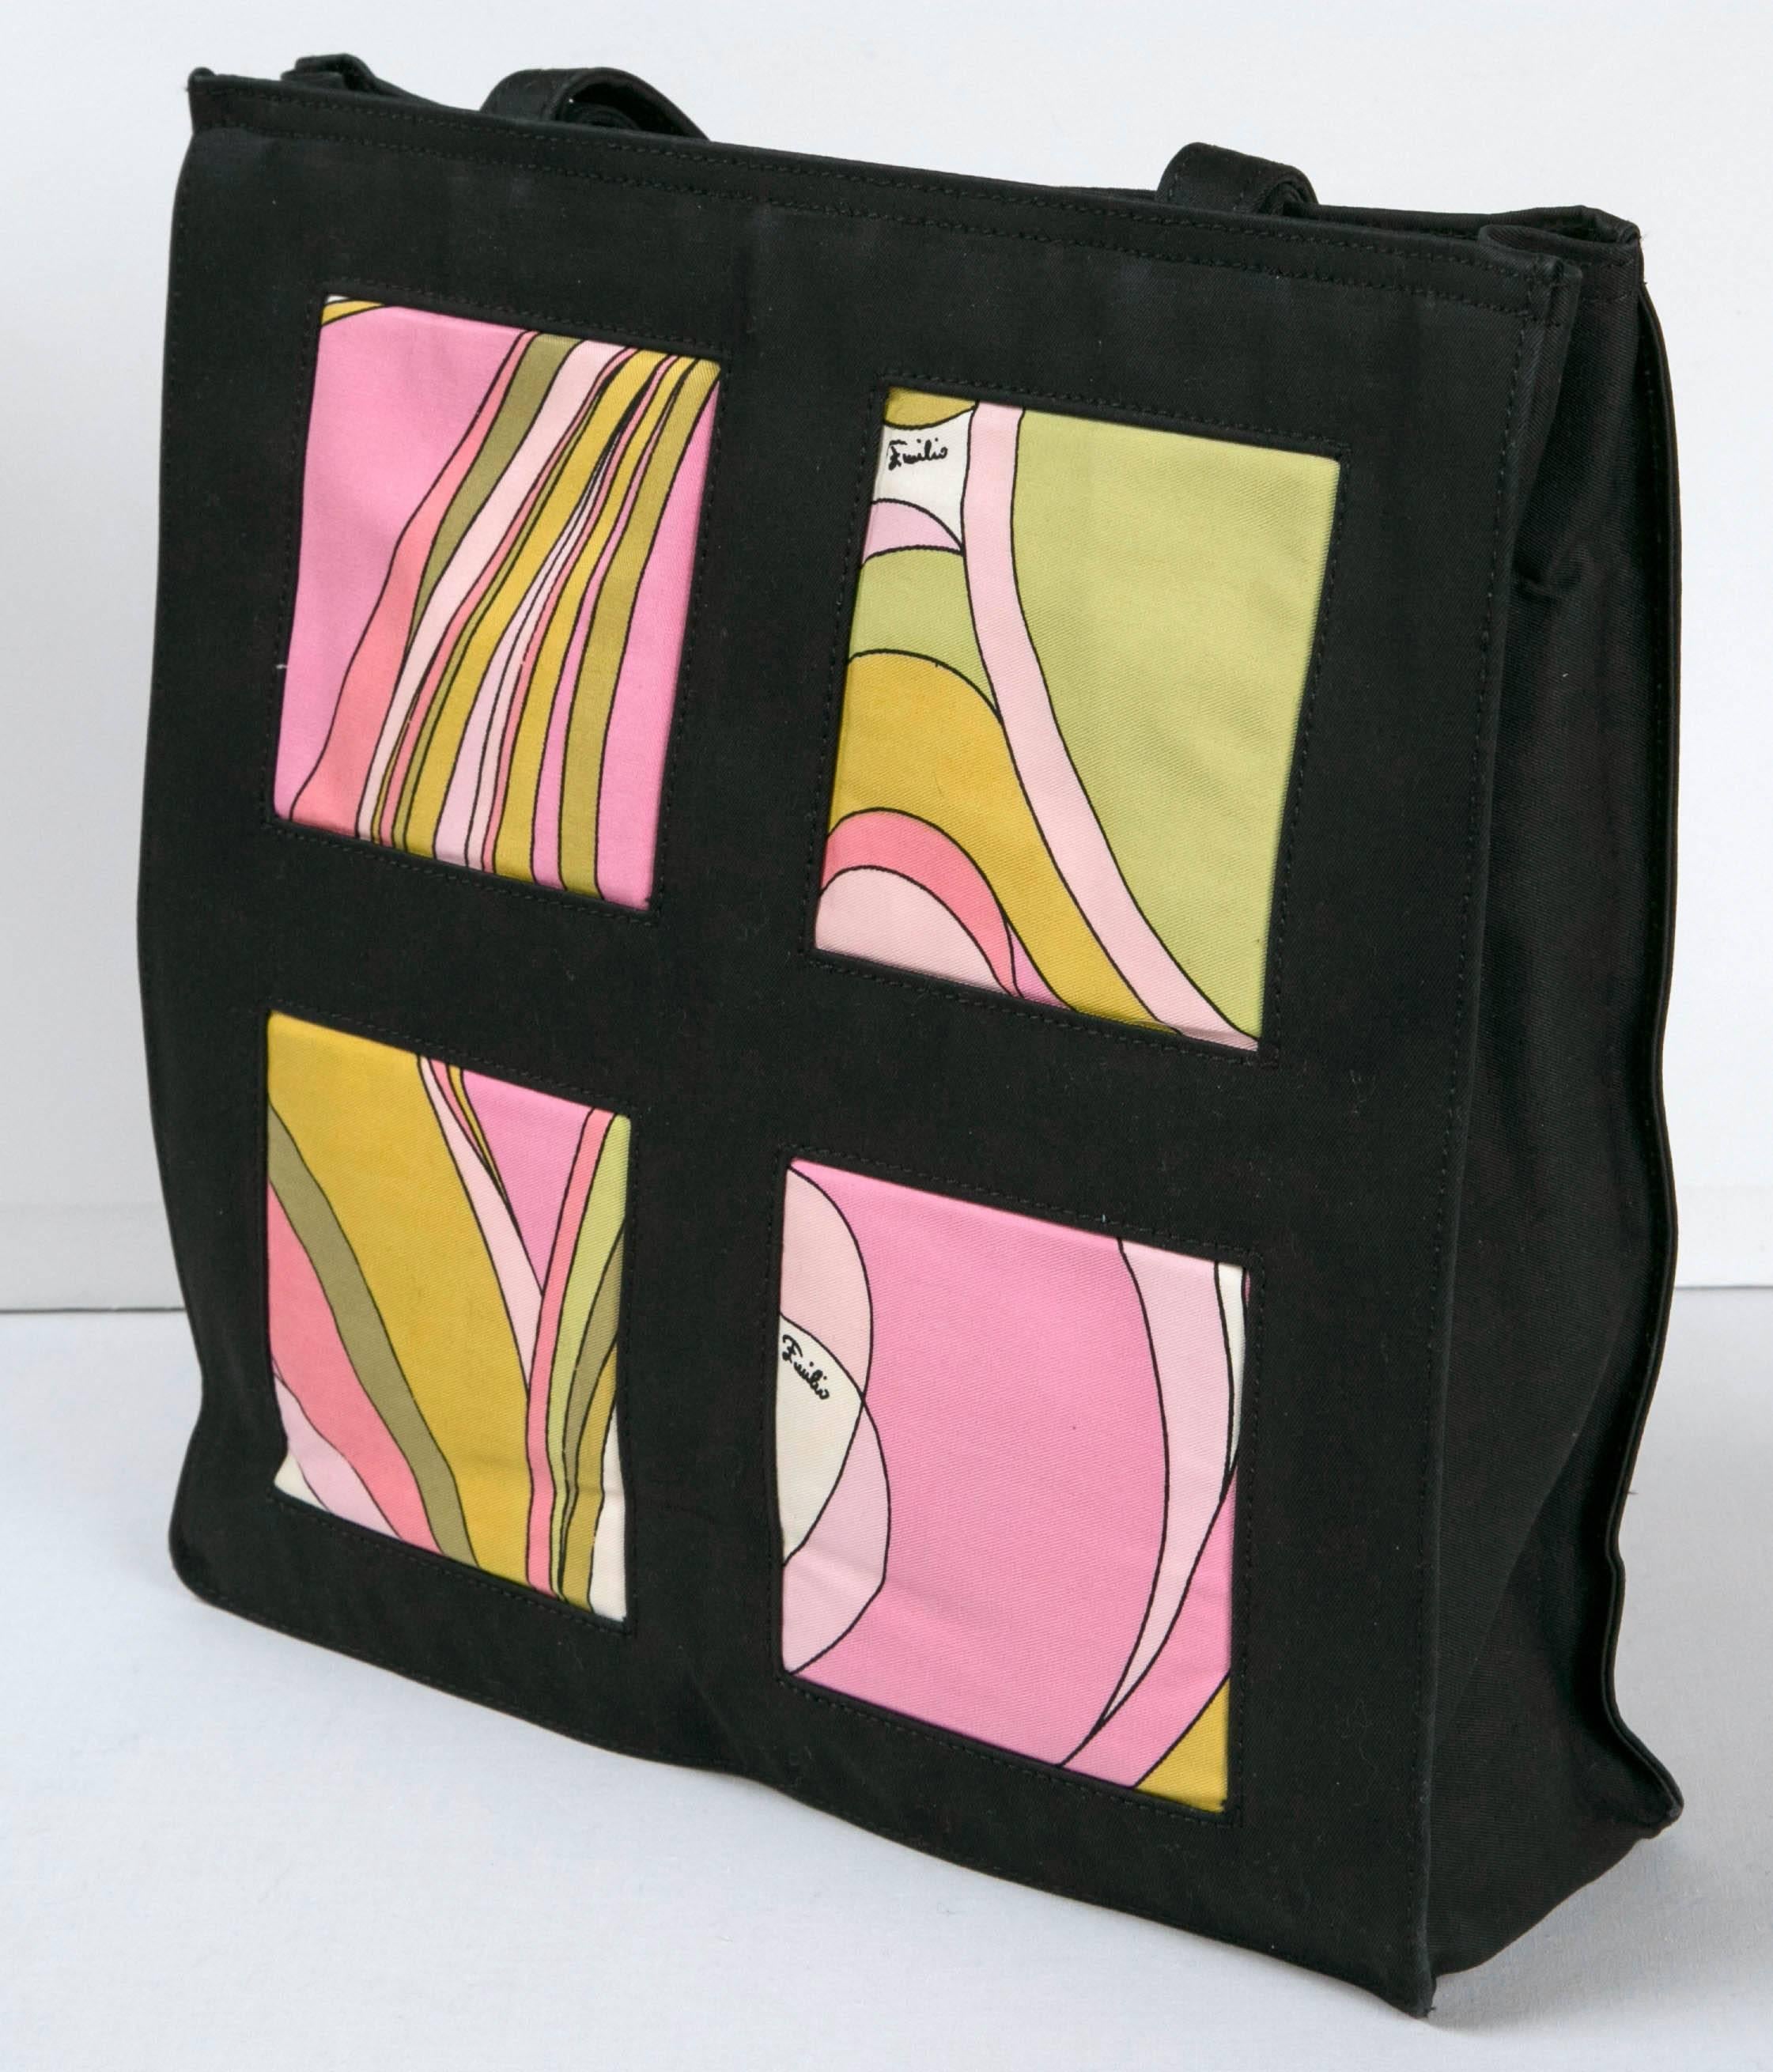 Unique Pucci 'find' in never used condition. the tote features 4 quadrants on each side boasting different Pucci prints. prerequisite 'Emilio' signatures in motifs. sturdy textile surround. Ready-to-wear: by day, by night, by beach, by where-ever.